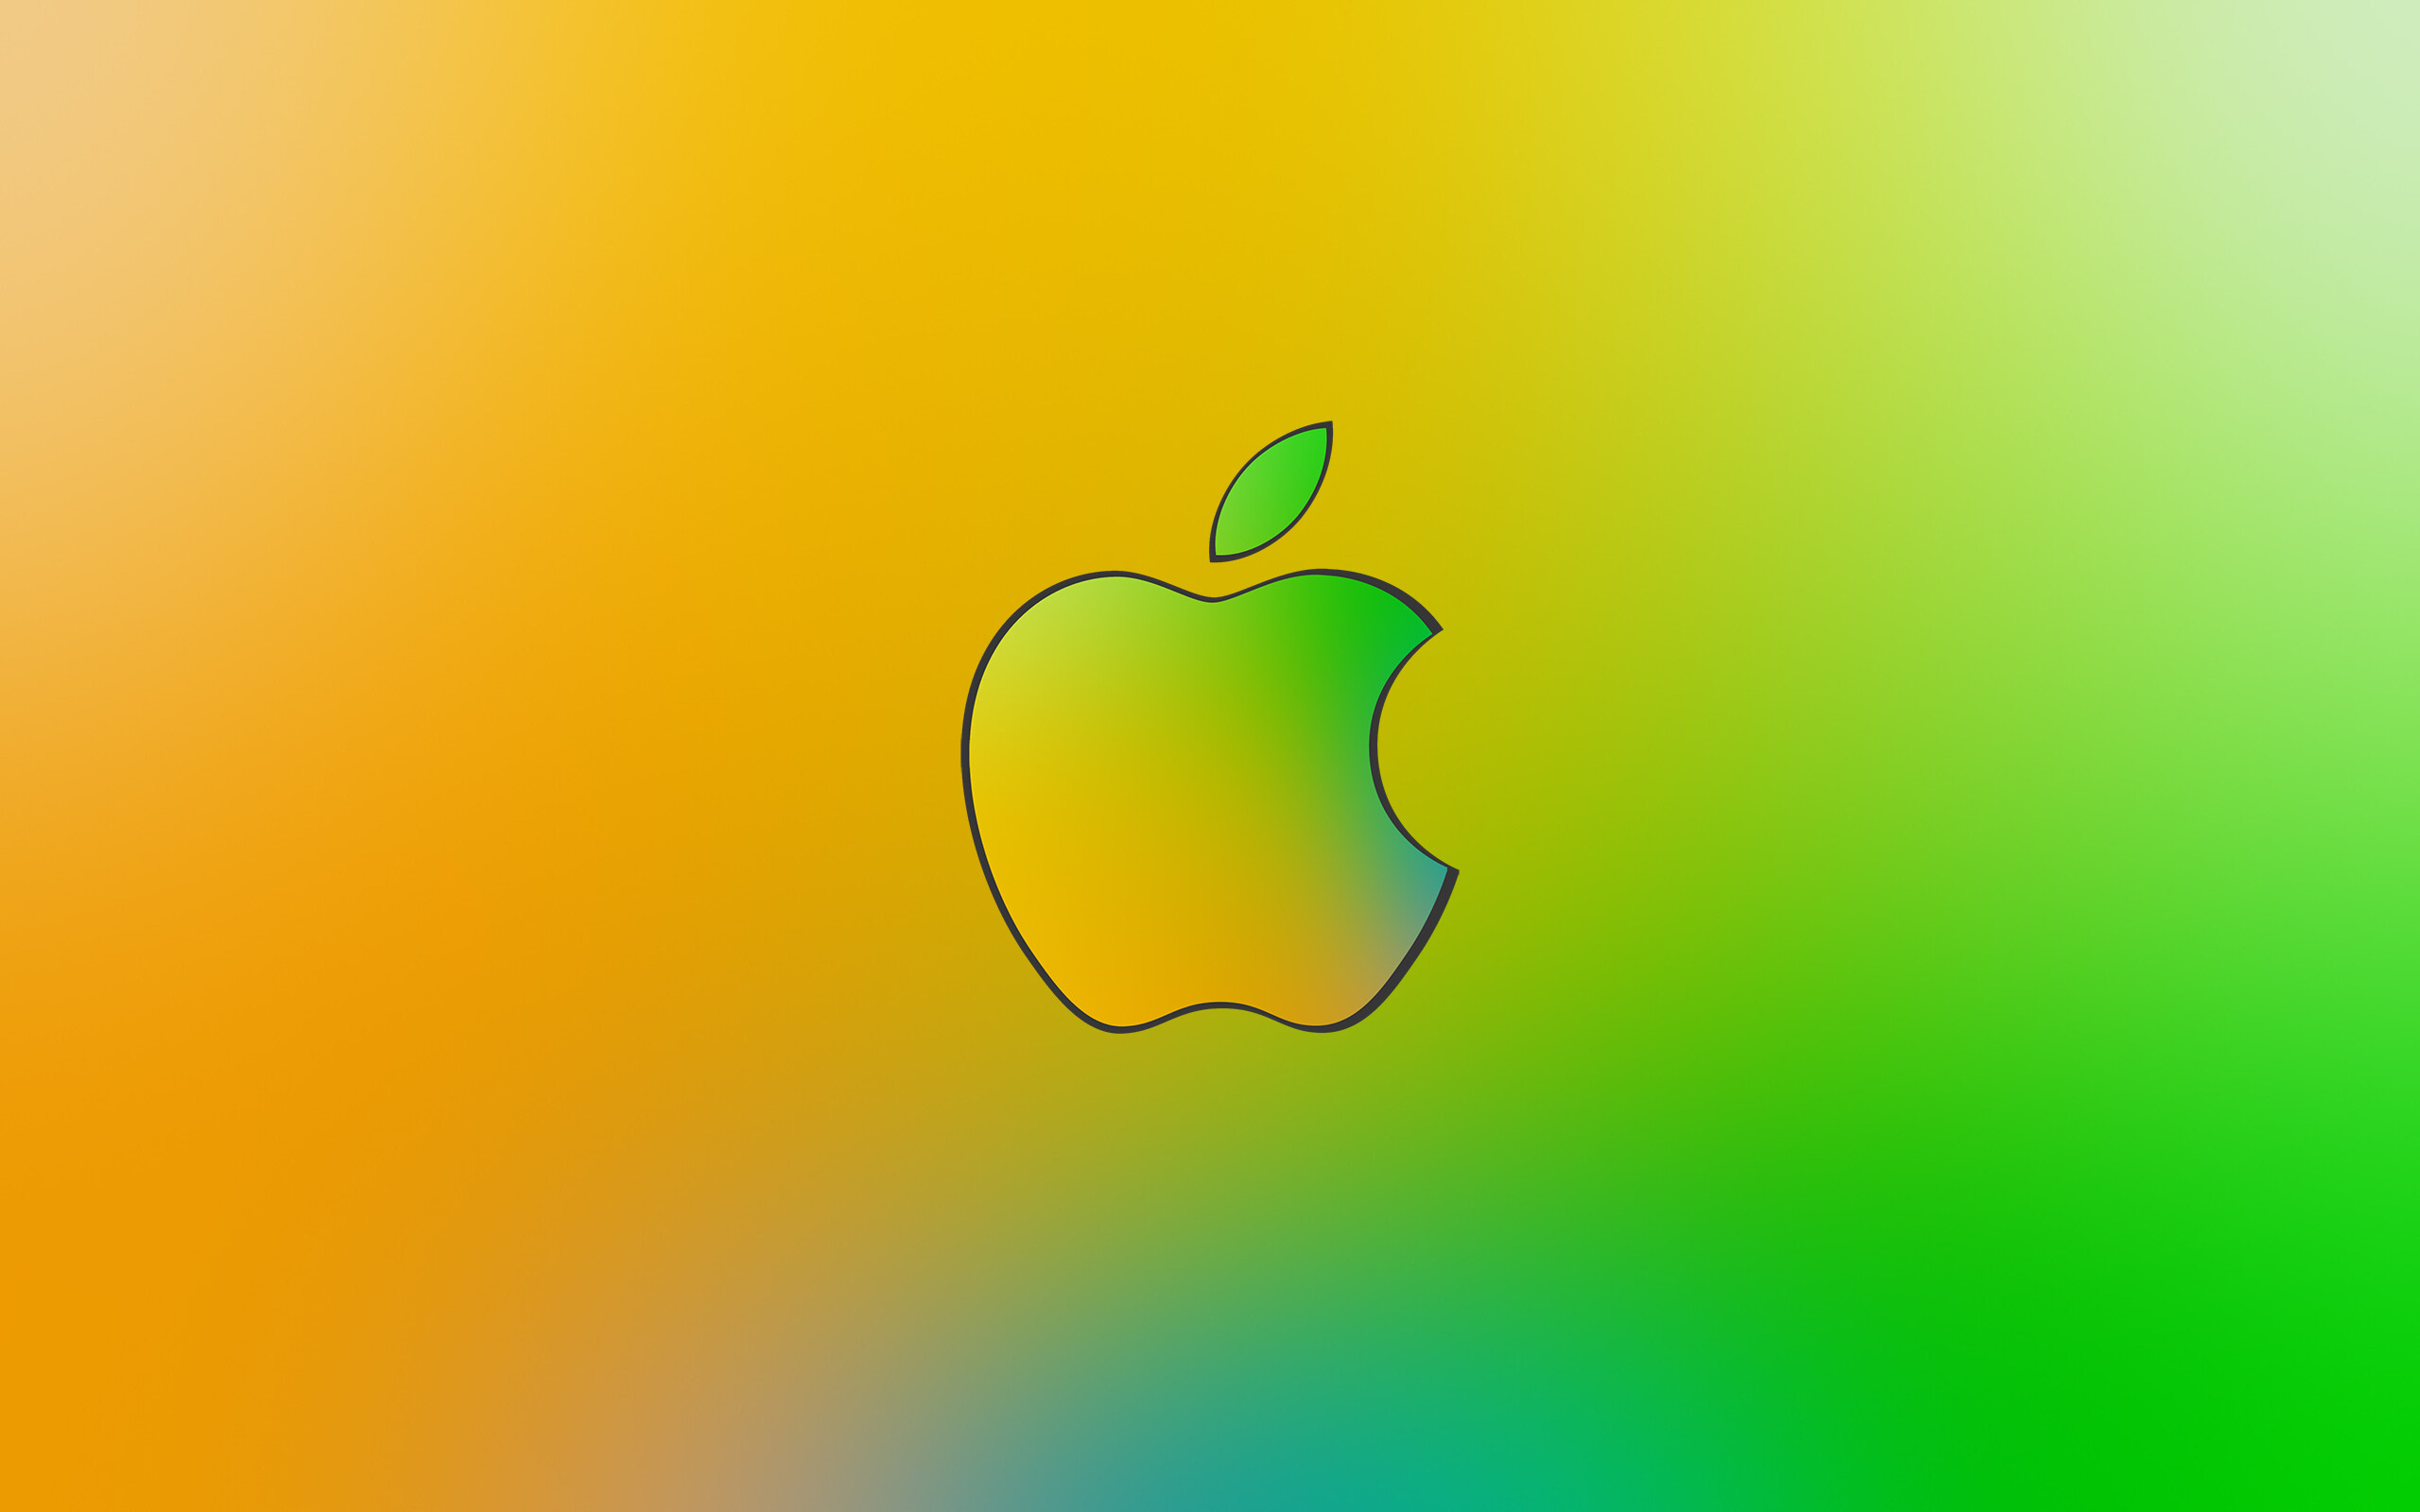 Apple Logo: American manufacturer of personal computers, smartphones, tablets. 2560x1600 HD Wallpaper.